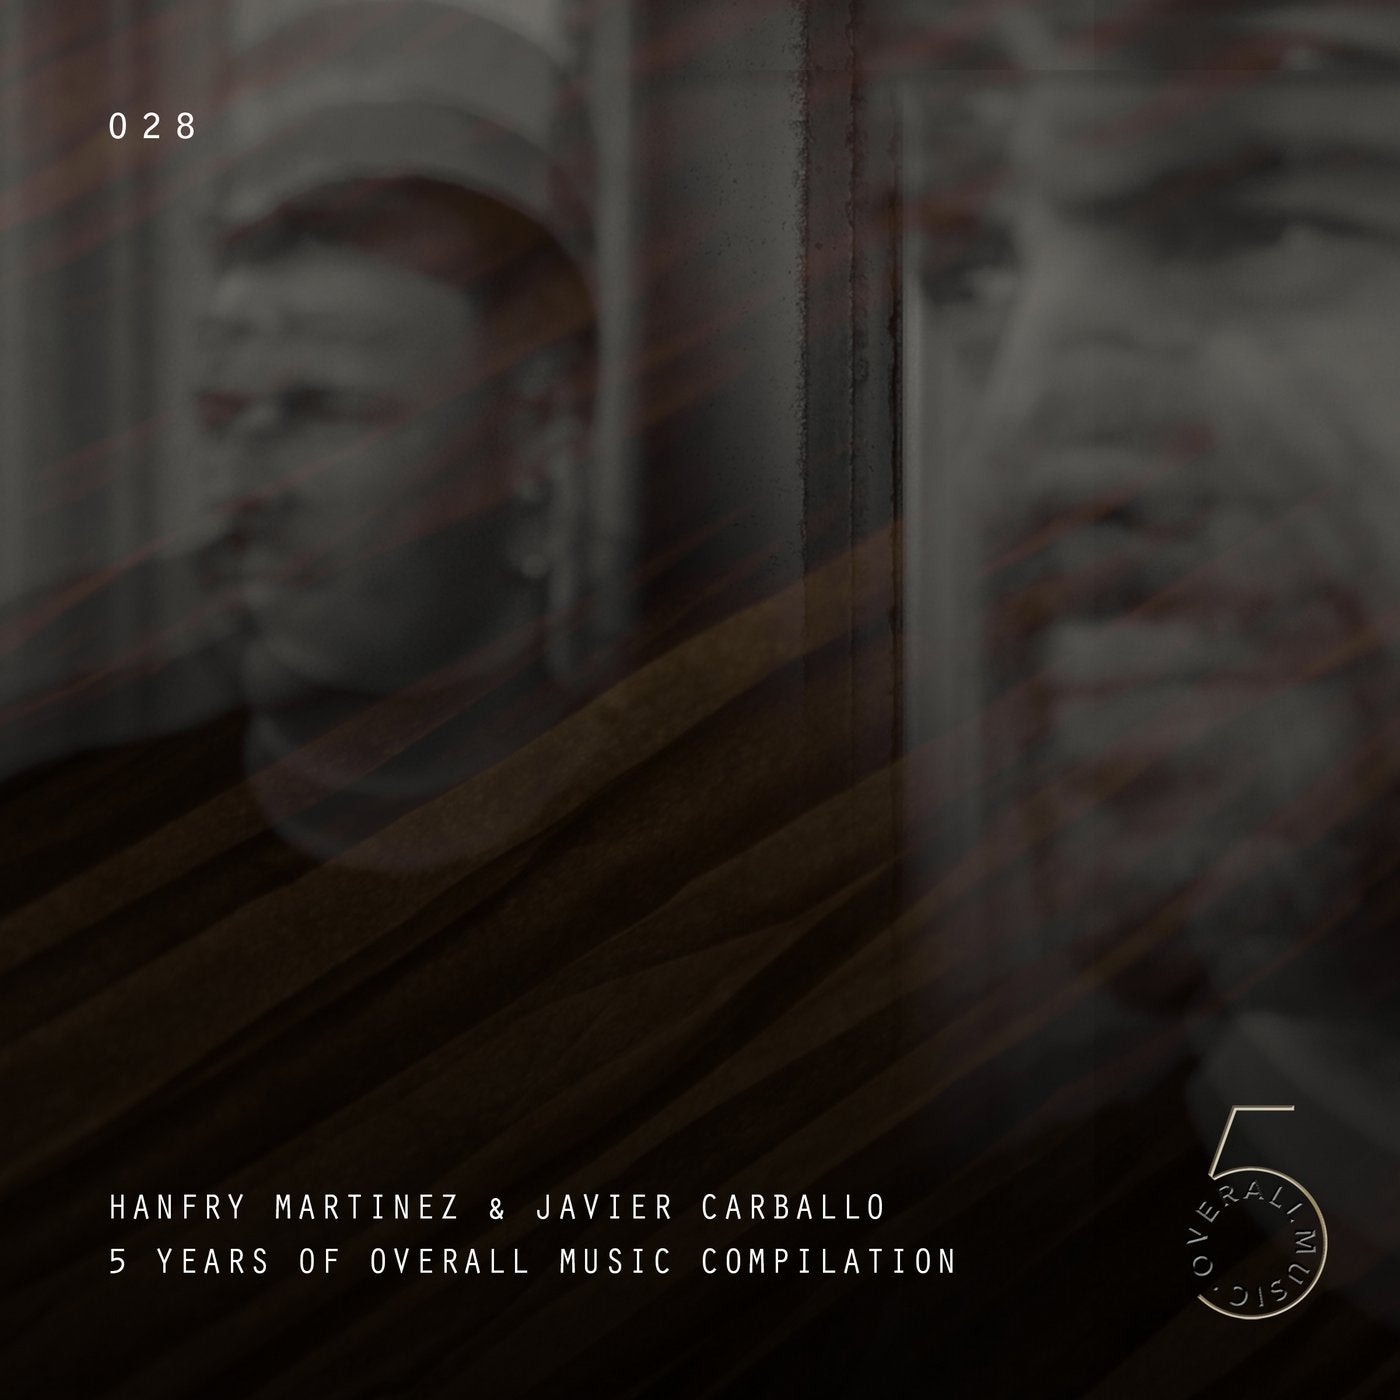 HANFRY MARTINEZ & JAVIER CARBALLO PRESENTS 5 YEARS OF OVERALL MUSIC